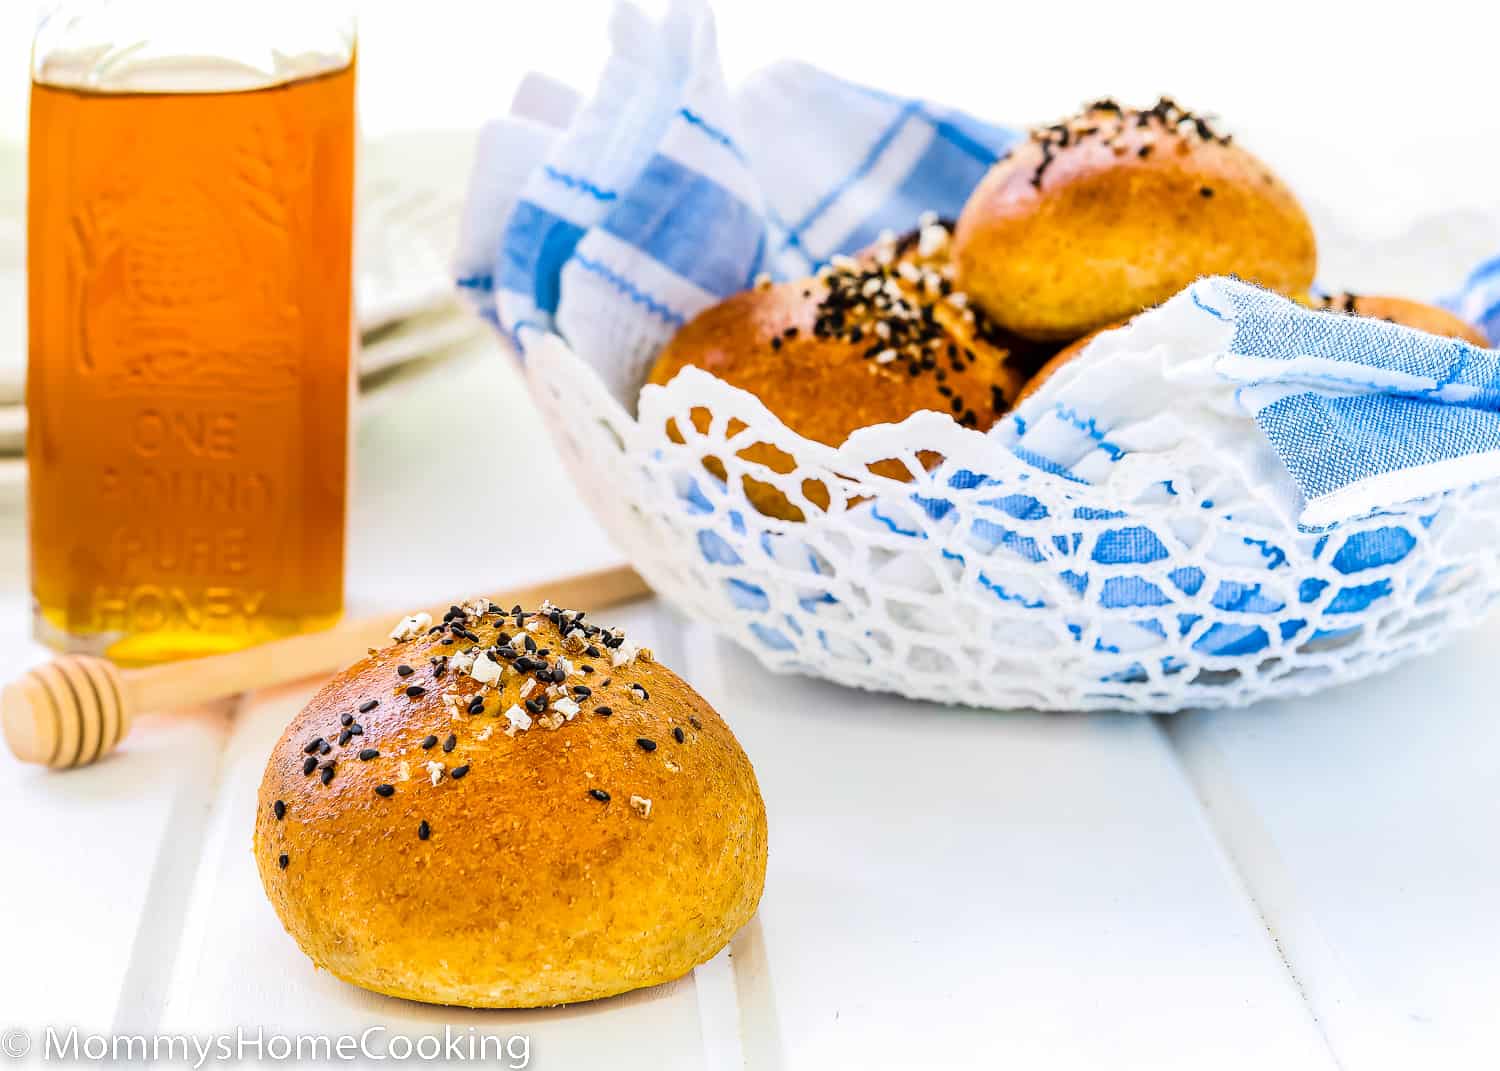 An Eggless Honey Whole Wheat Roll with sesame seeds, pretzel salt, a honey bottle, and a bread basket in the background.